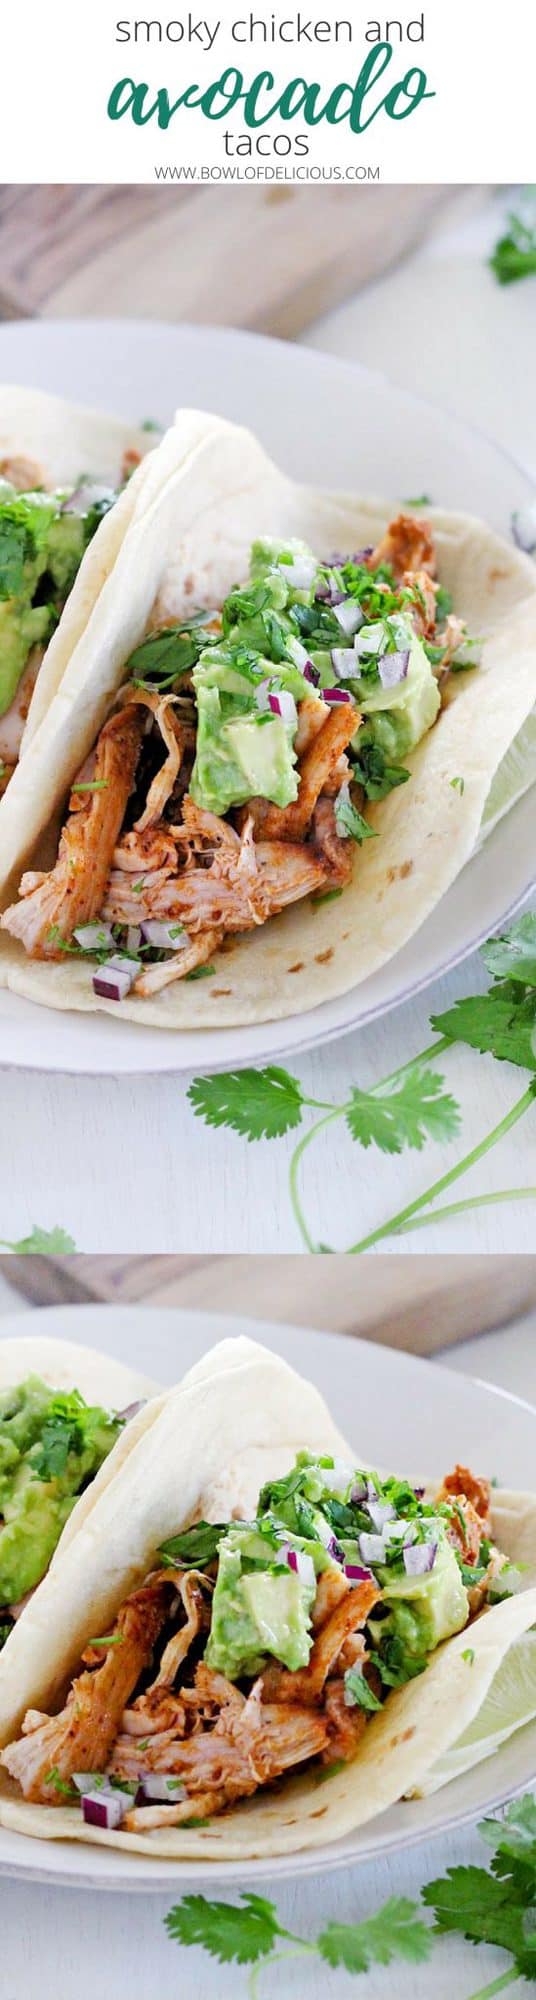 These smoky chicken and avocado tacos come together in only 20 minutes! They'll be your new favorite easy weeknight recipe for taco night and the whole family will love them. #TacoTuesday #MexicanFood